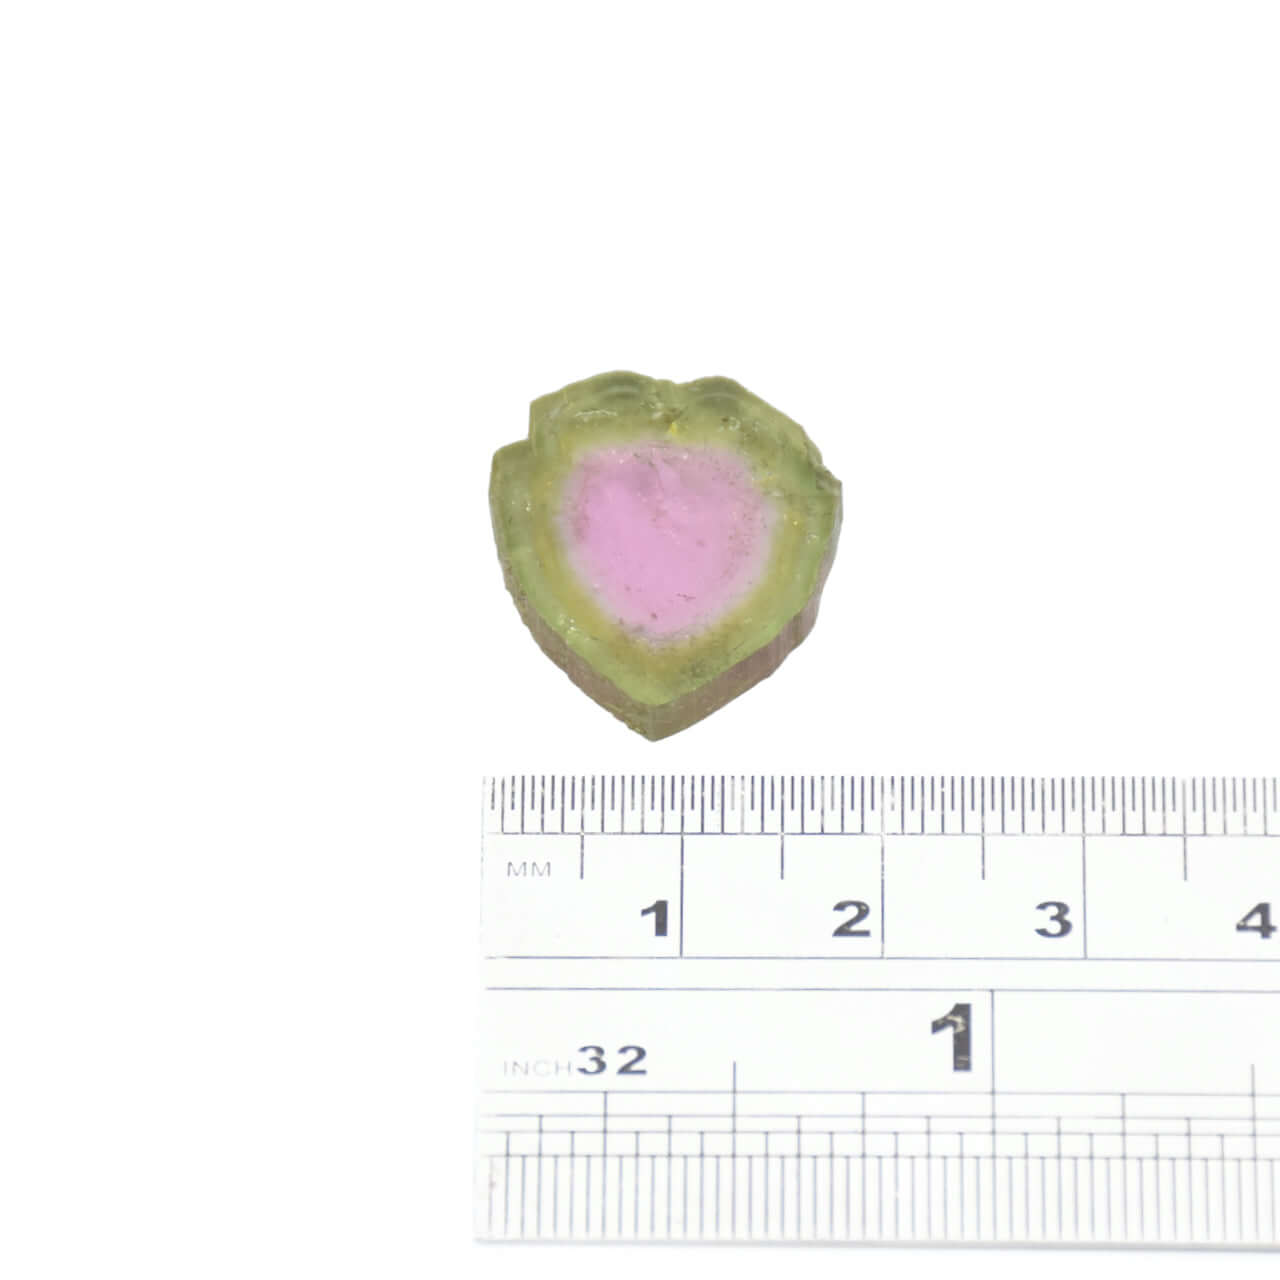 A bright green and light pink large watermelon tourmaline